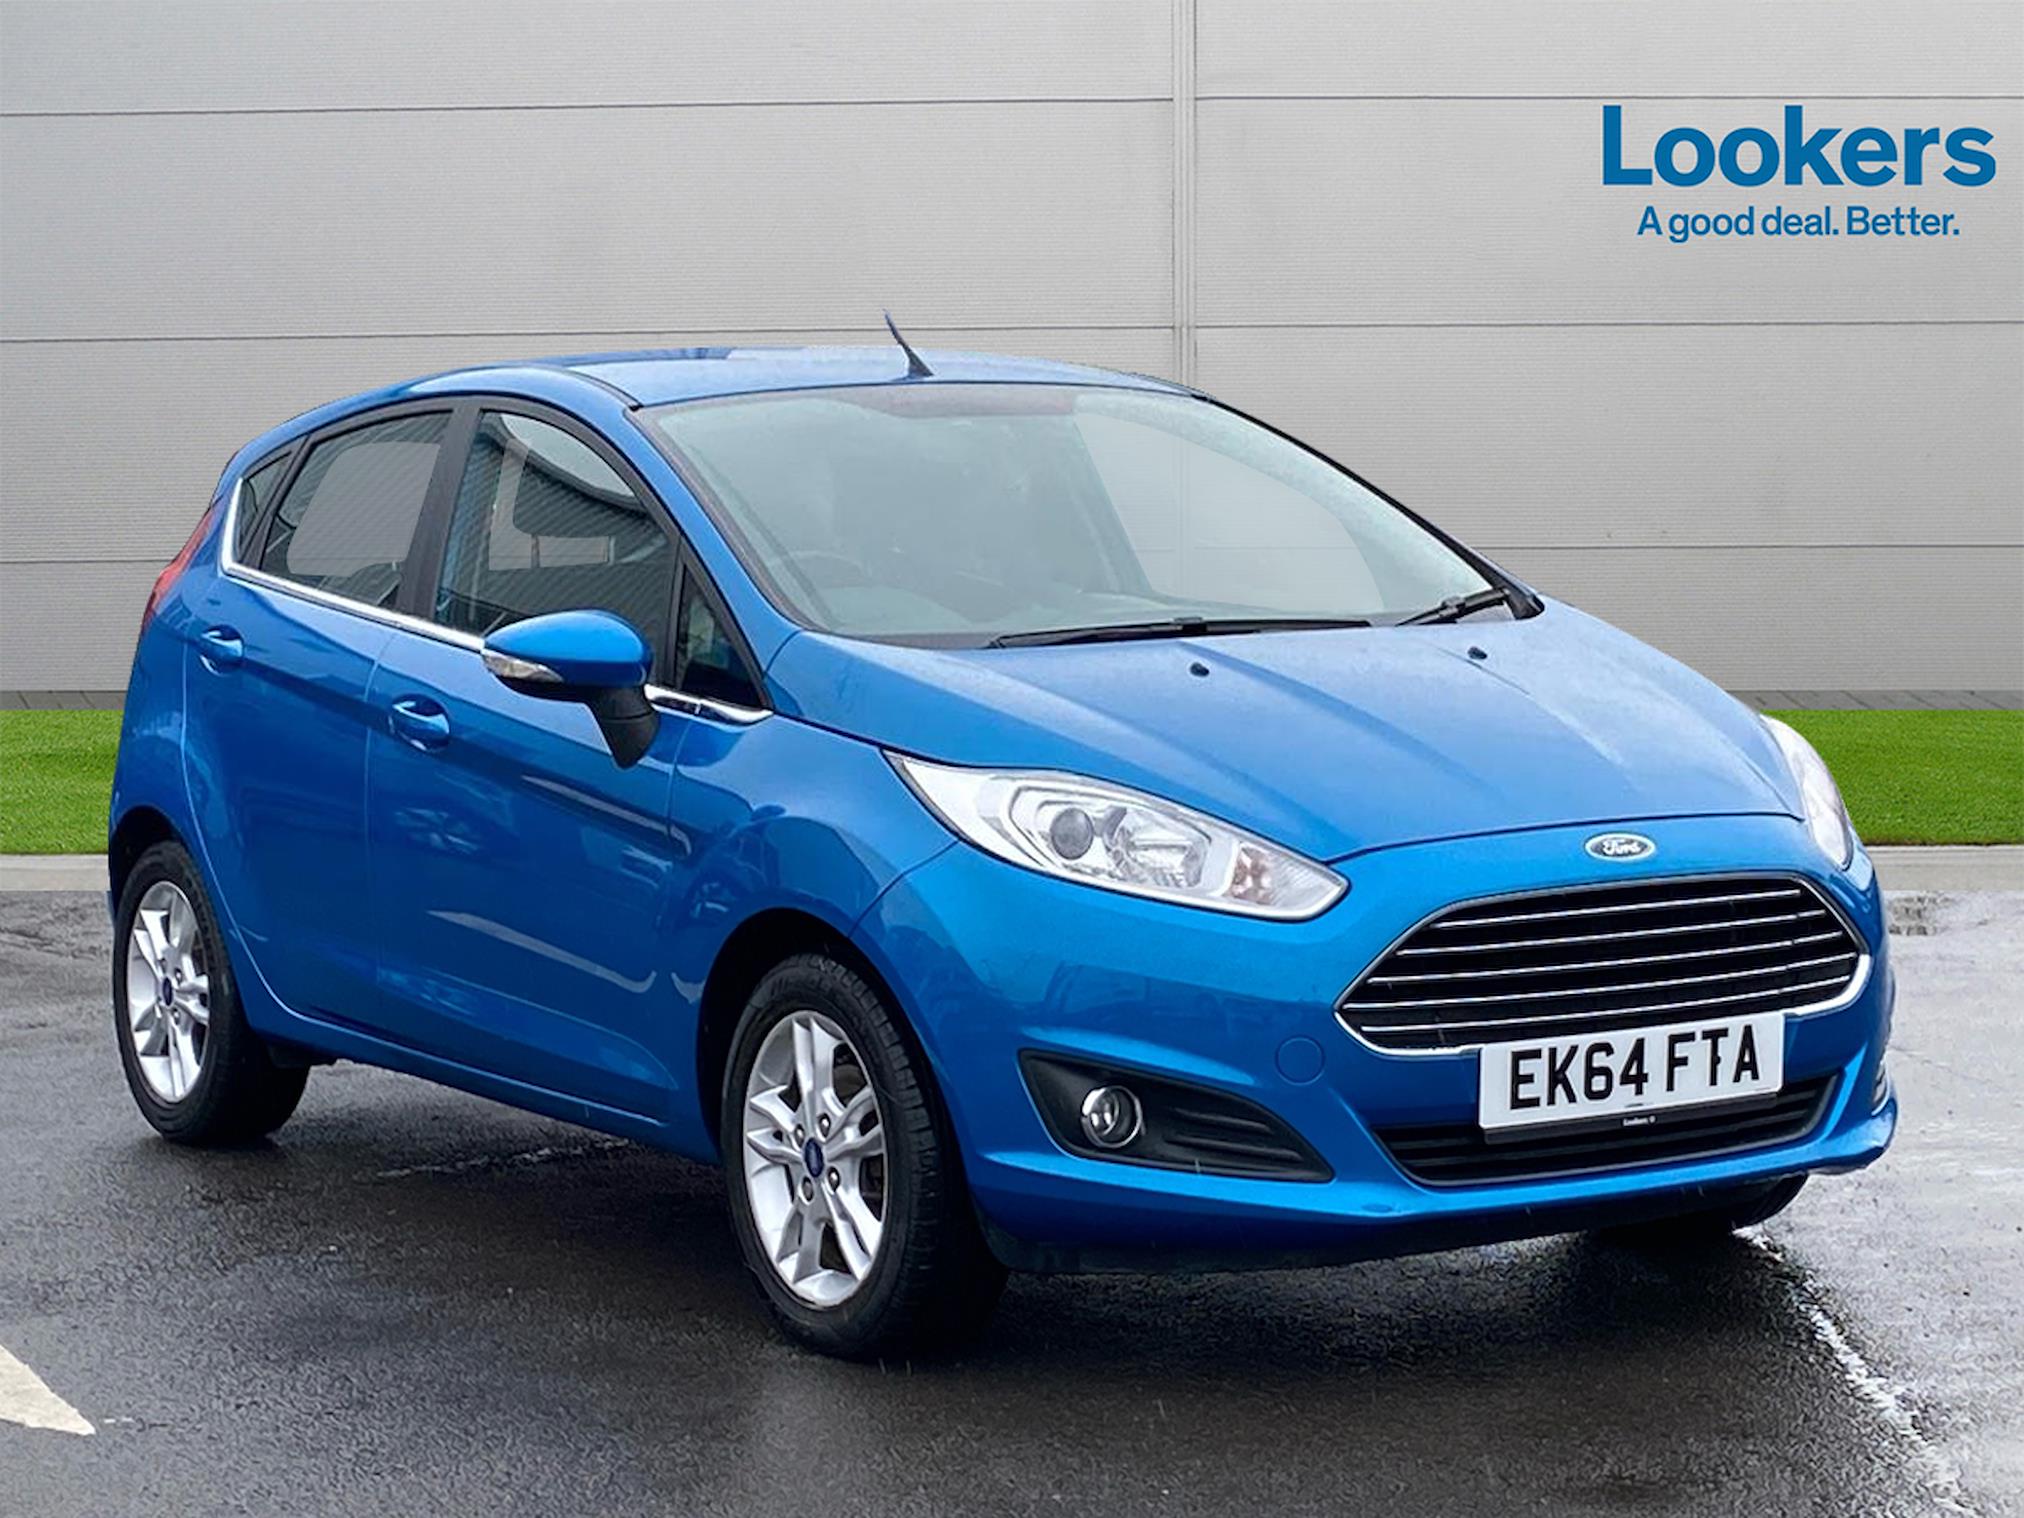 Used FORD FIESTA 1.0 Zetec 5Dr 2014